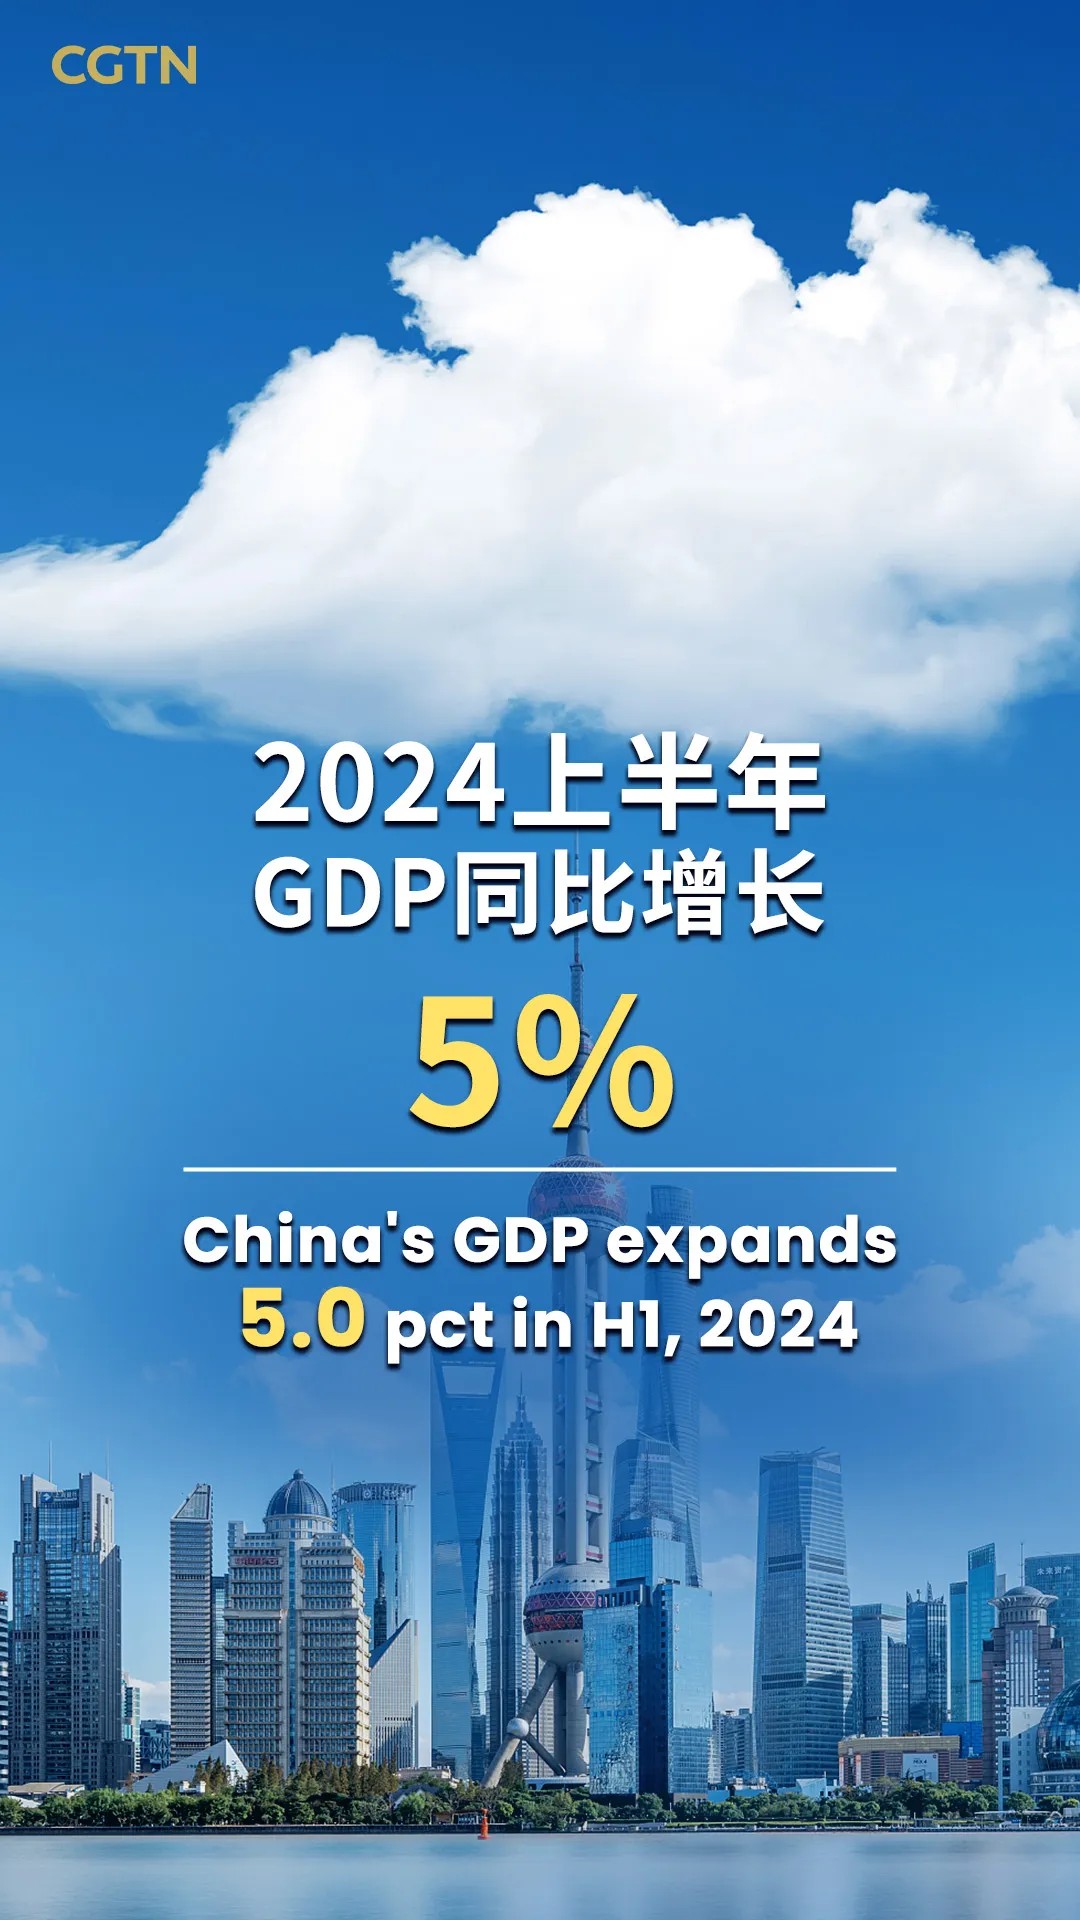 Graphics: China's GDP expands 5% in H1